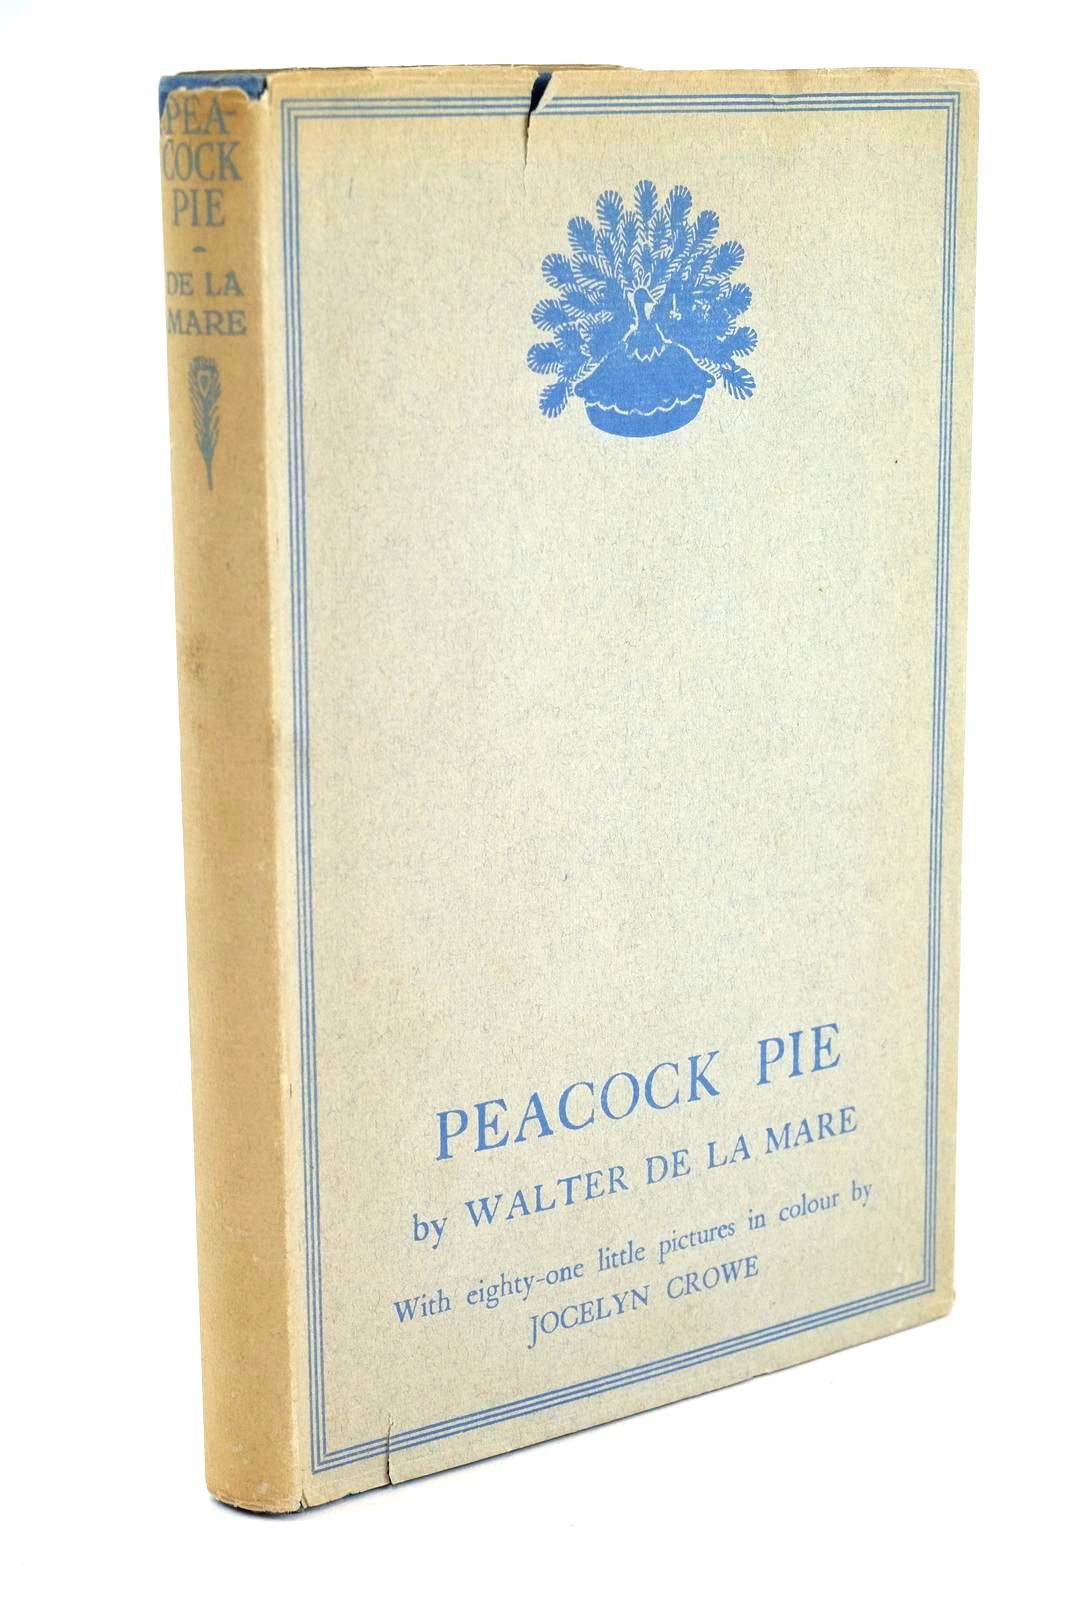 Photo of PEACOCK PIE written by De La Mare, Walter illustrated by Crowe, Jocelyn published by Constable & Co. Ltd. (STOCK CODE: 1324077)  for sale by Stella & Rose's Books